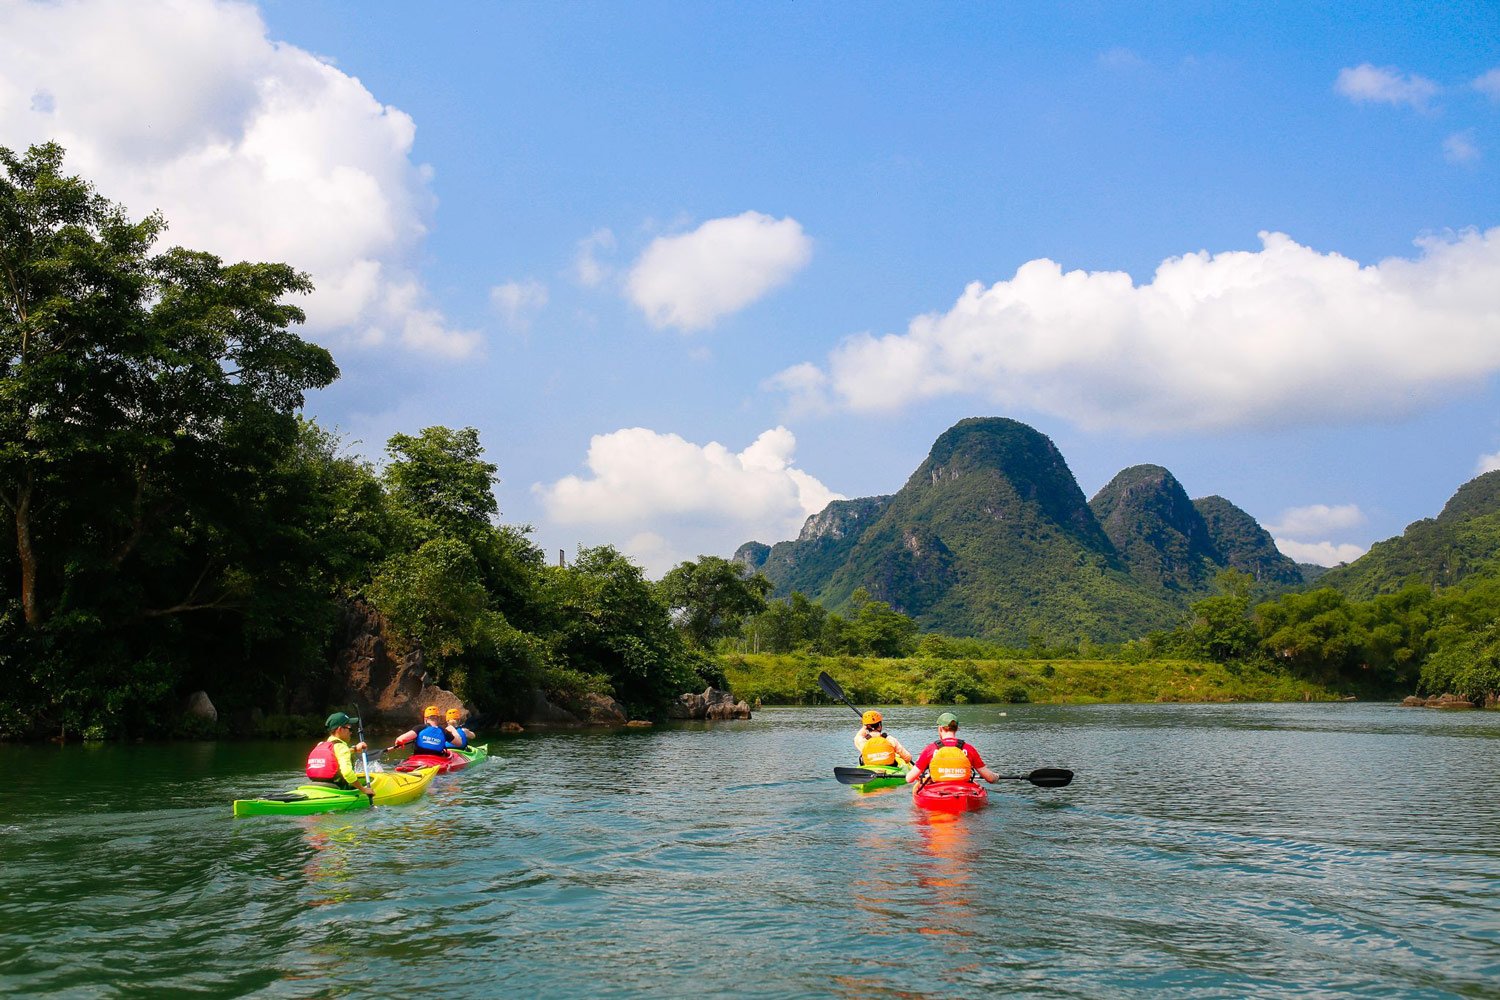 Experience the serenity of gliding on water, surrounded by lush landscapes and wildlife, on exciting kayaking and canoeing tours.